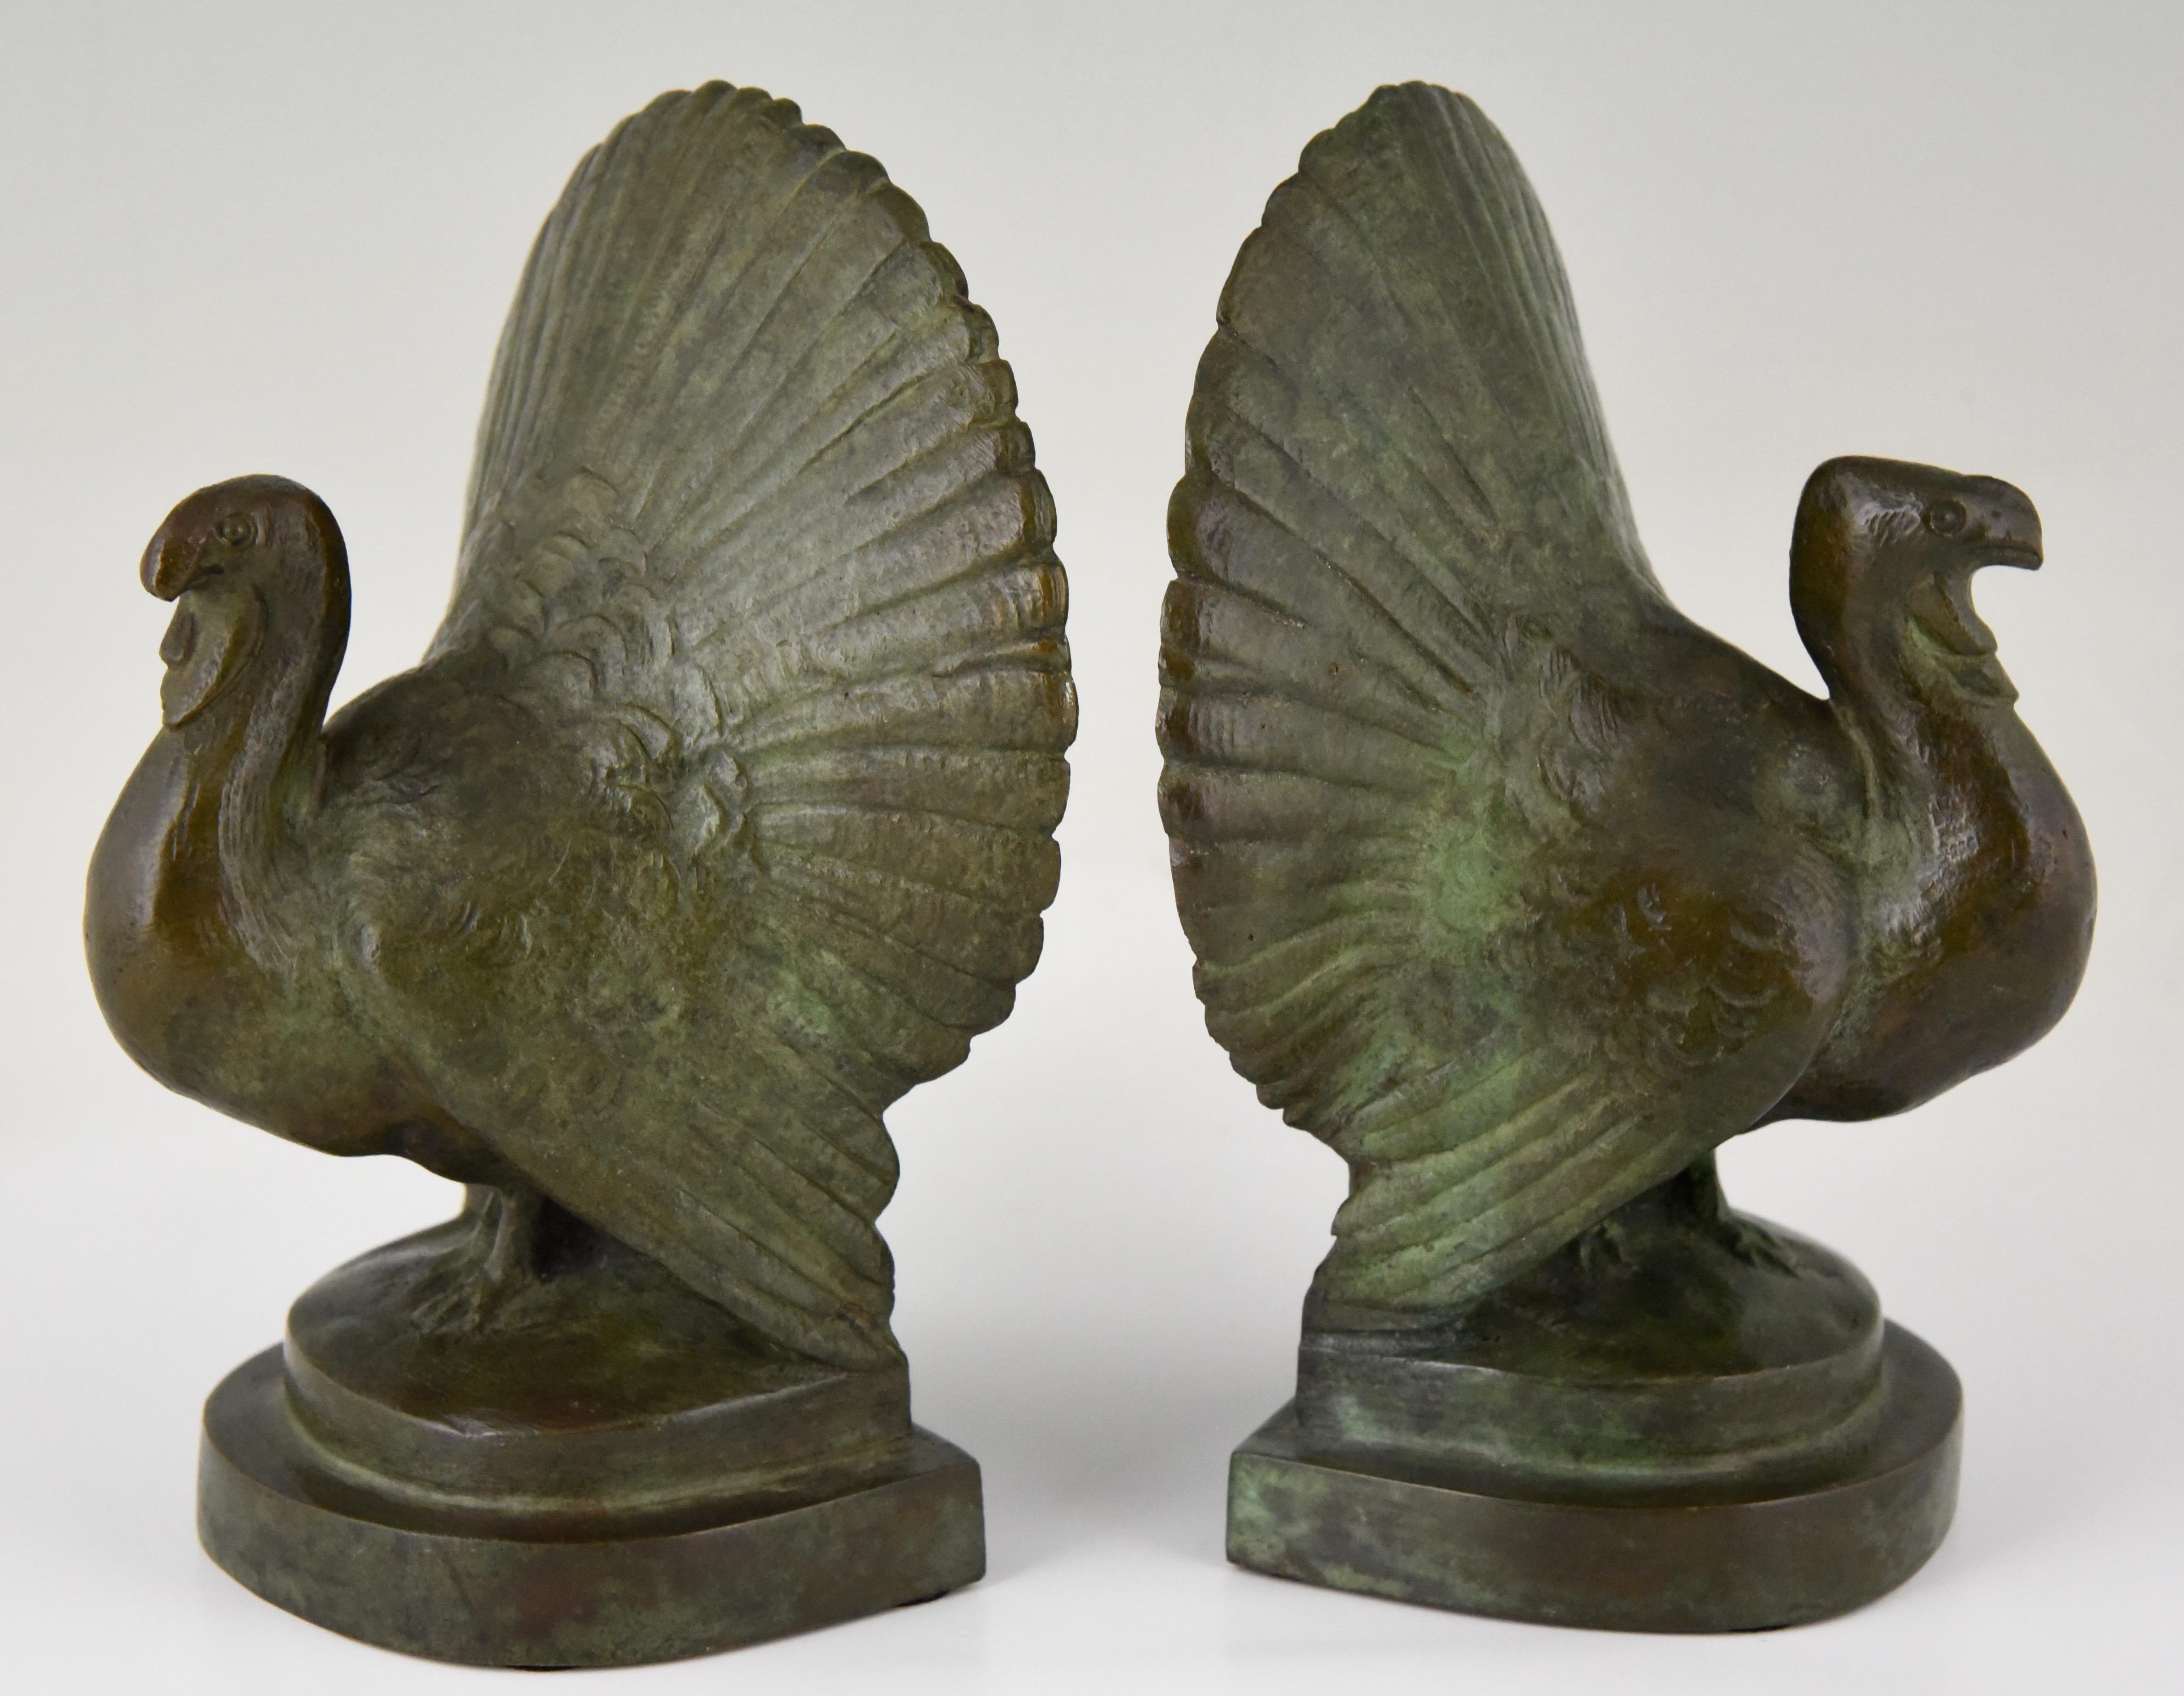 Beautiful pair of Art Deco bronze bookends modelled as turkeys with lovely dark green patina. Signed by the French artist Claude, circa 1930. 
Literture:
“Art deco sculpture” Victor Arwas, Academy.
?“Dictionnaire illustré des sculpteurs